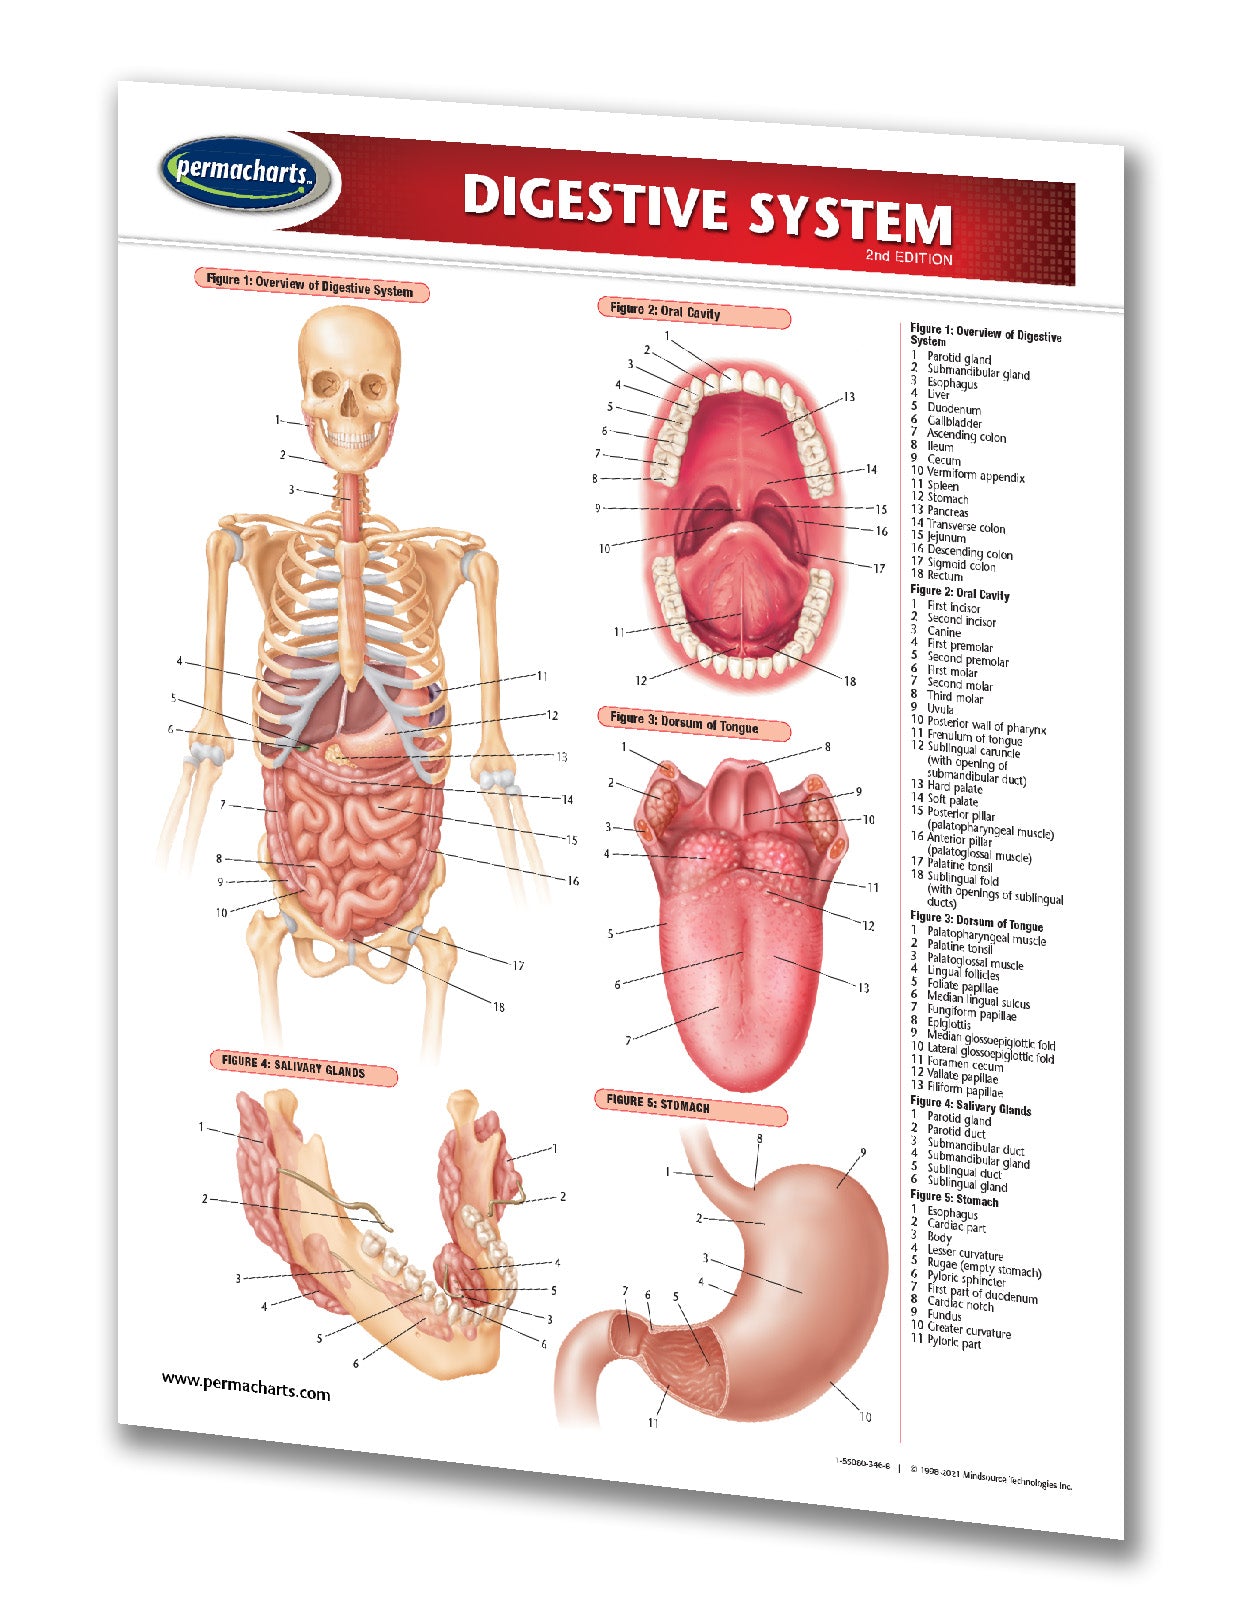  Skeletal System Chart - 24 x 36 Laminated Poster - Medical  Quick Reference Guide by Permacharts : Office Products